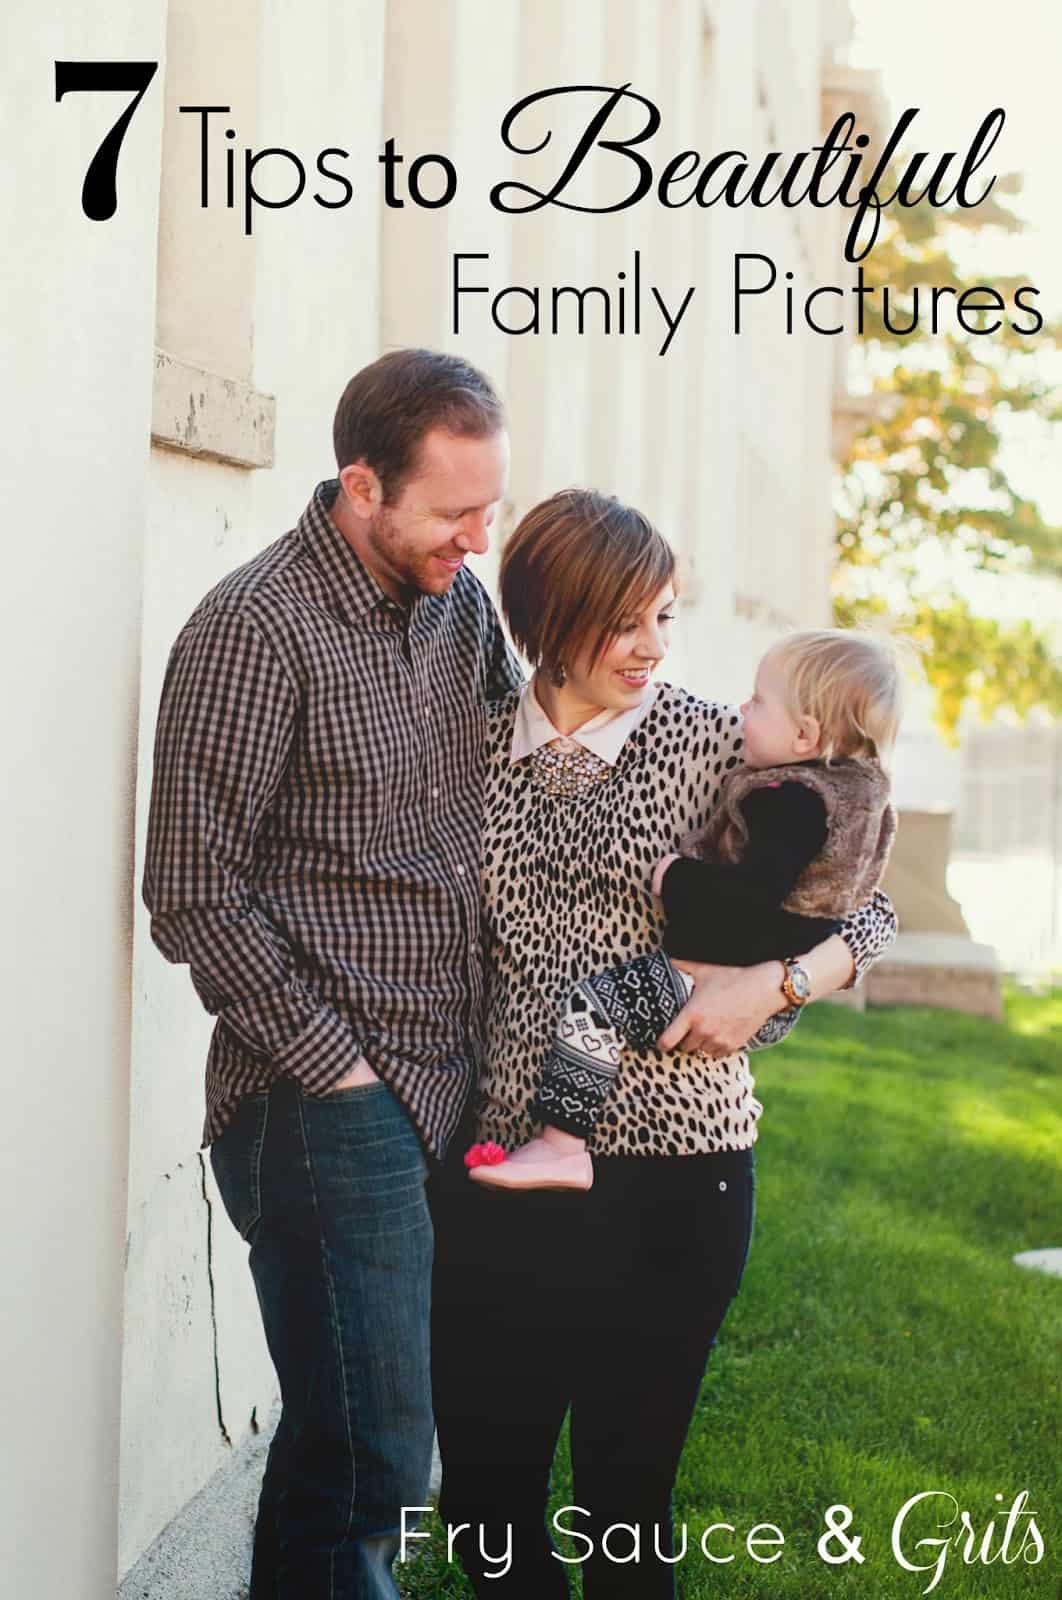 7 Tips to Beautiful Family Pictures